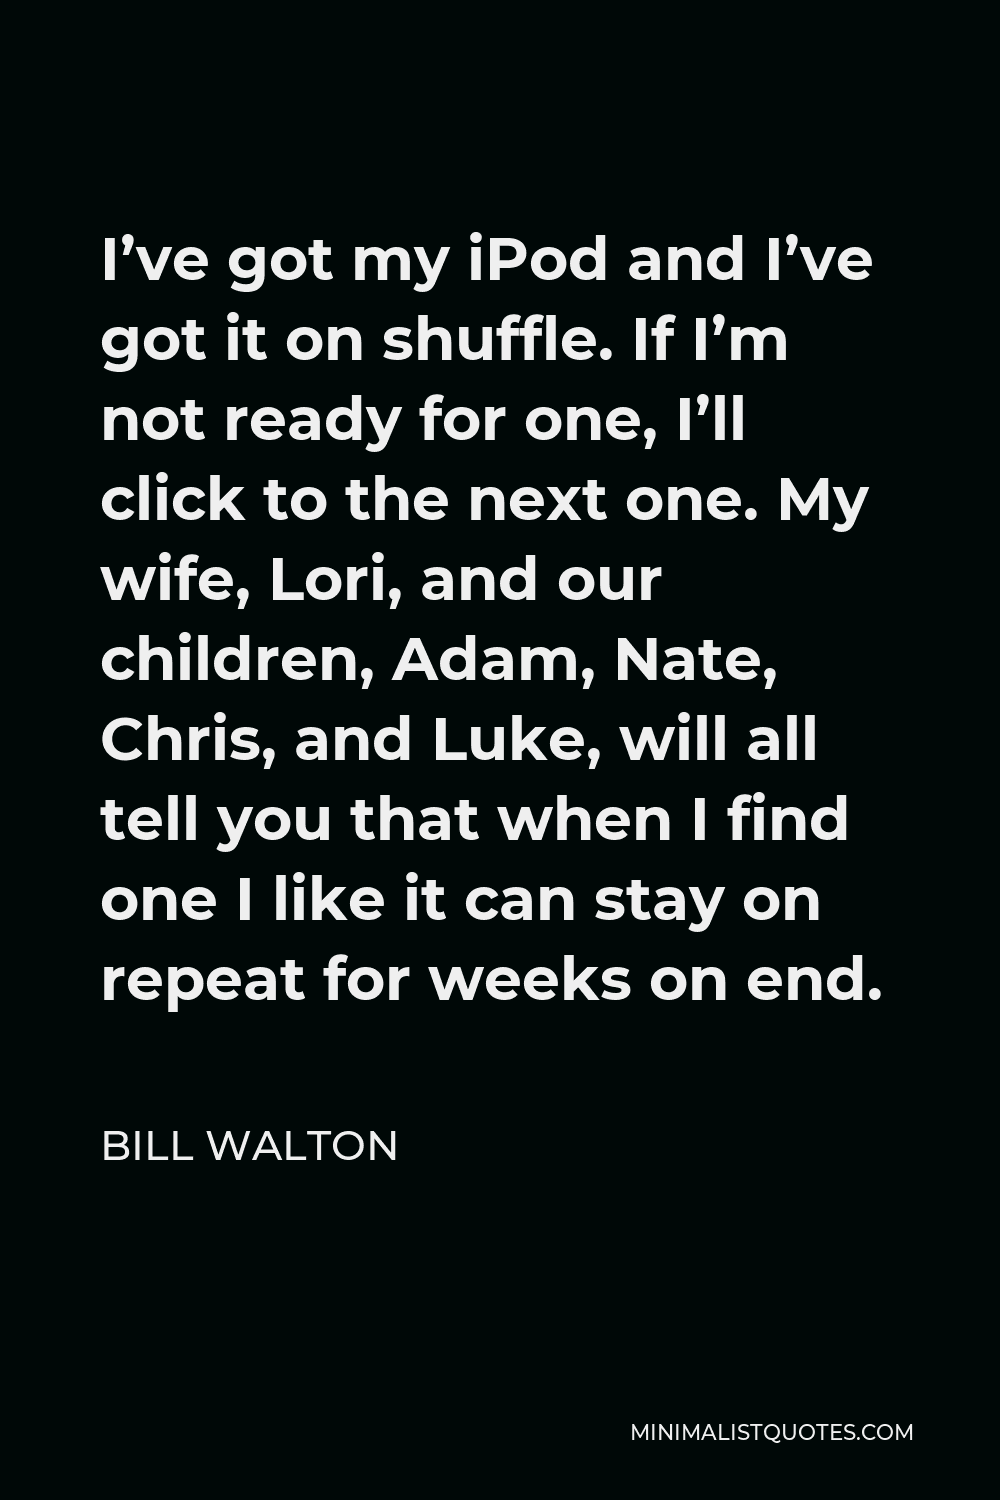 Bill Walton Quote - I’ve got my iPod and I’ve got it on shuffle. If I’m not ready for one, I’ll click to the next one. My wife, Lori, and our children, Adam, Nate, Chris, and Luke, will all tell you that when I find one I like it can stay on repeat for weeks on end.